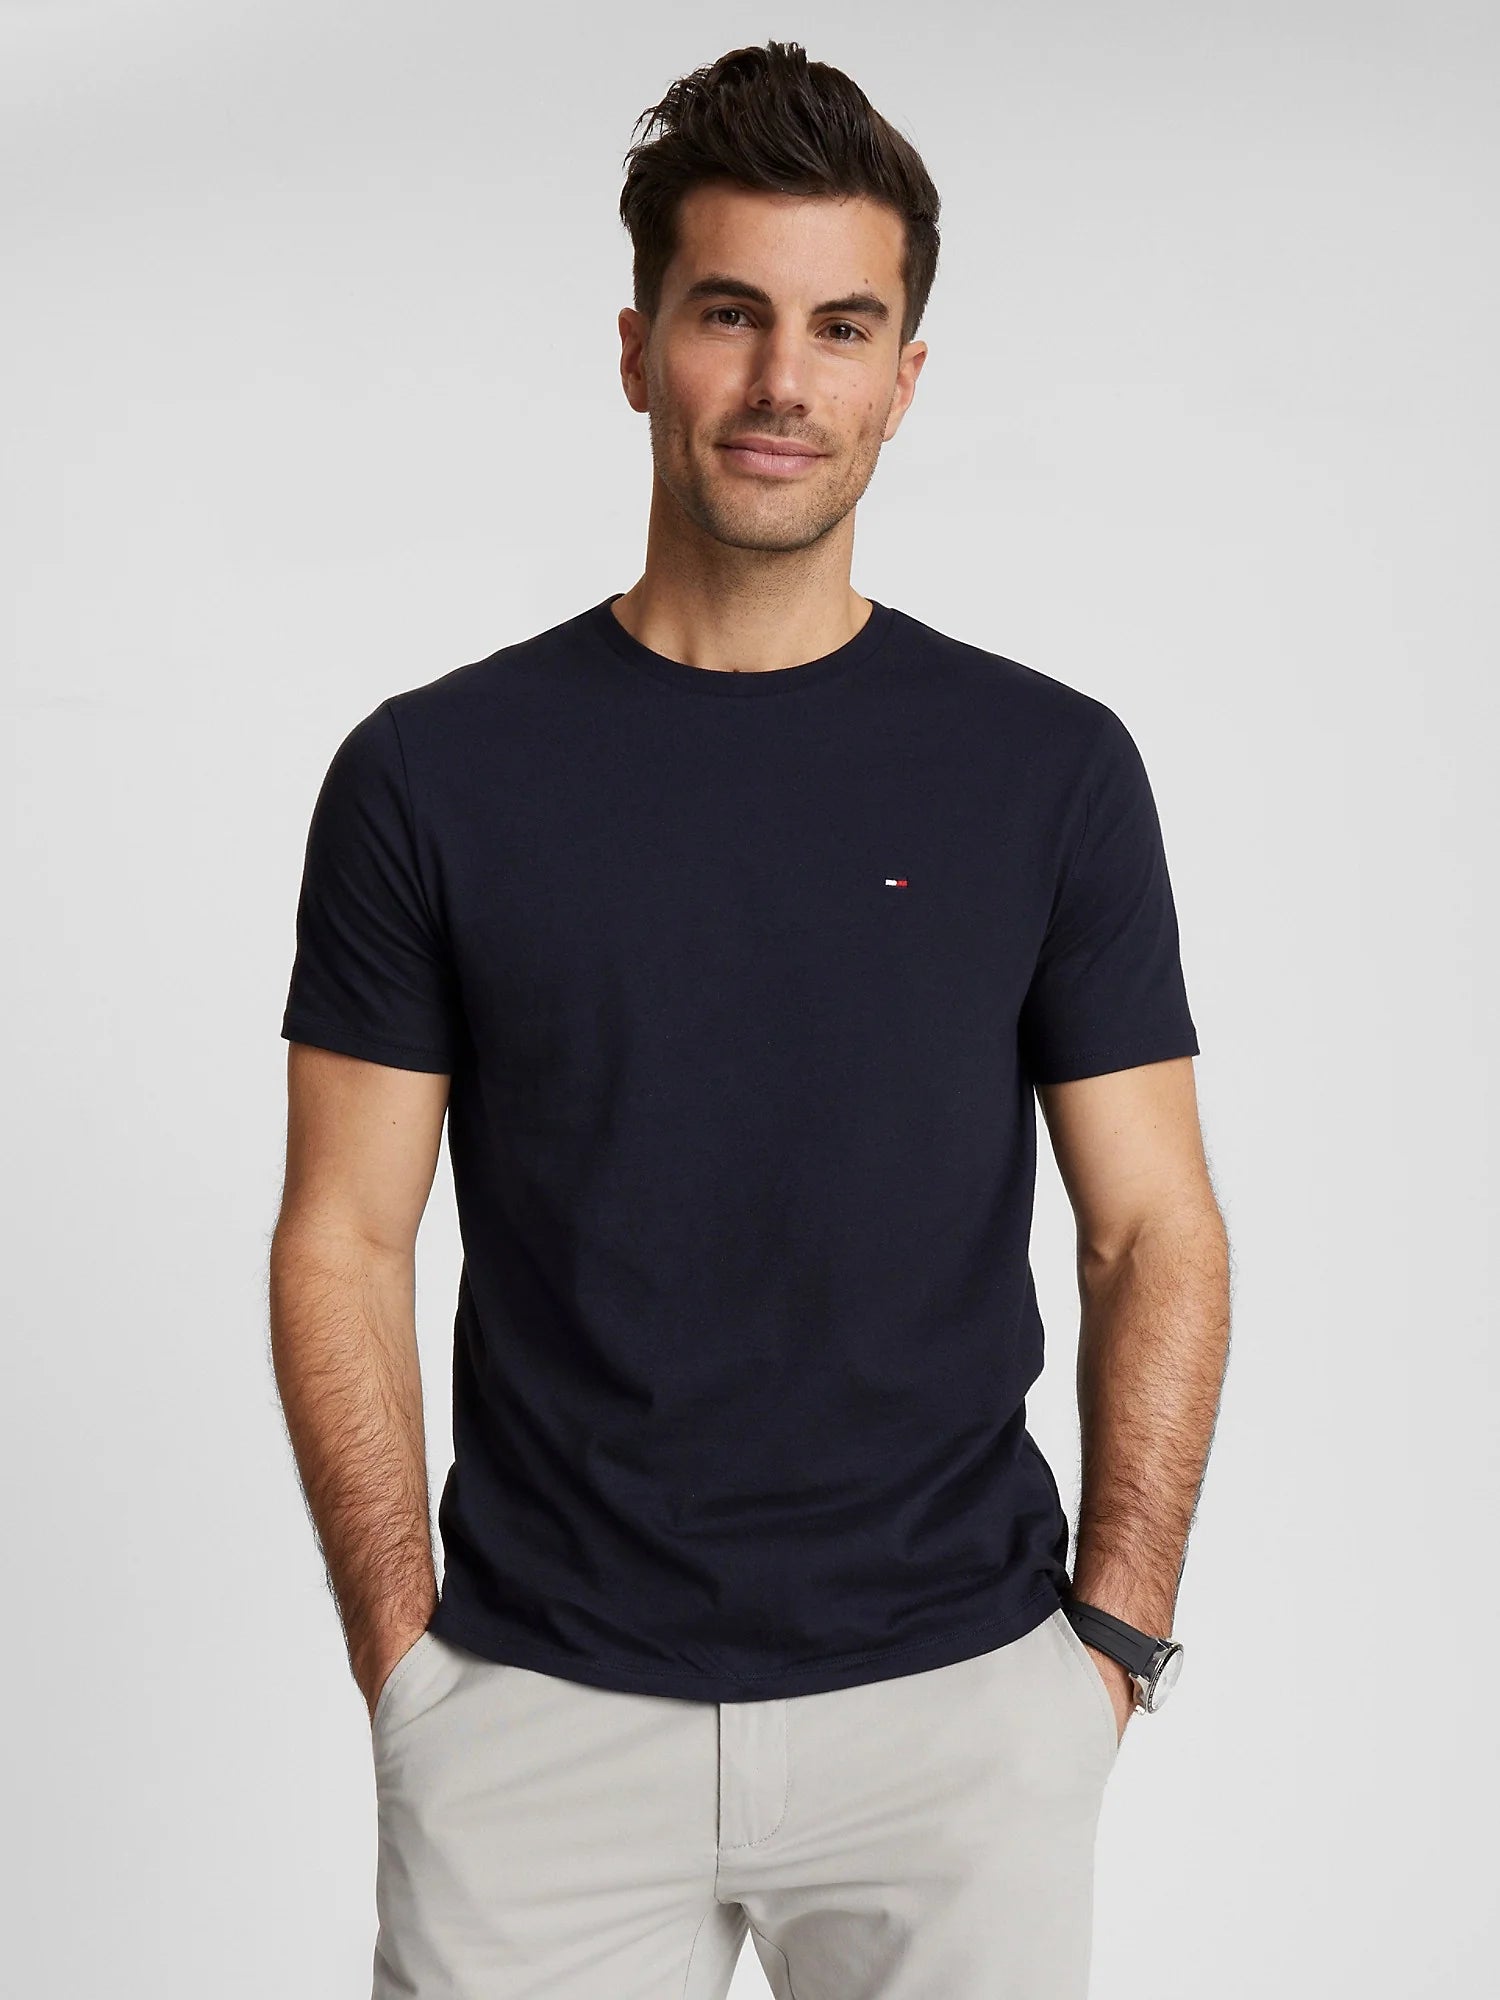 Tommy Hilfiger Azul Navy – Store In Perú